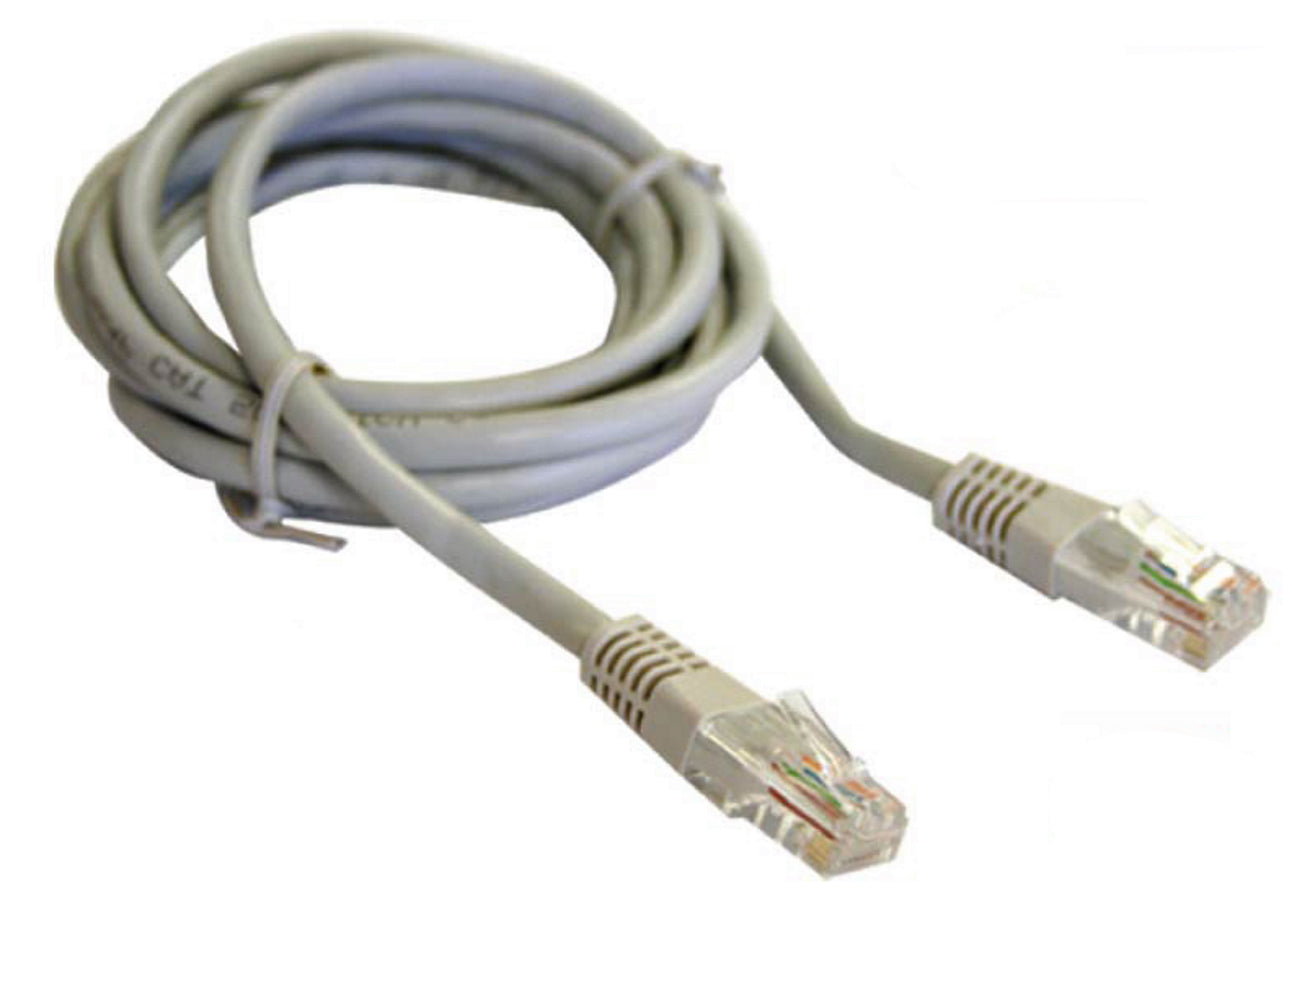 CAT-5E Networking Patch Cable 6 ft. Gray RJ45 DSL High-Speed Ethernet, SONITEK